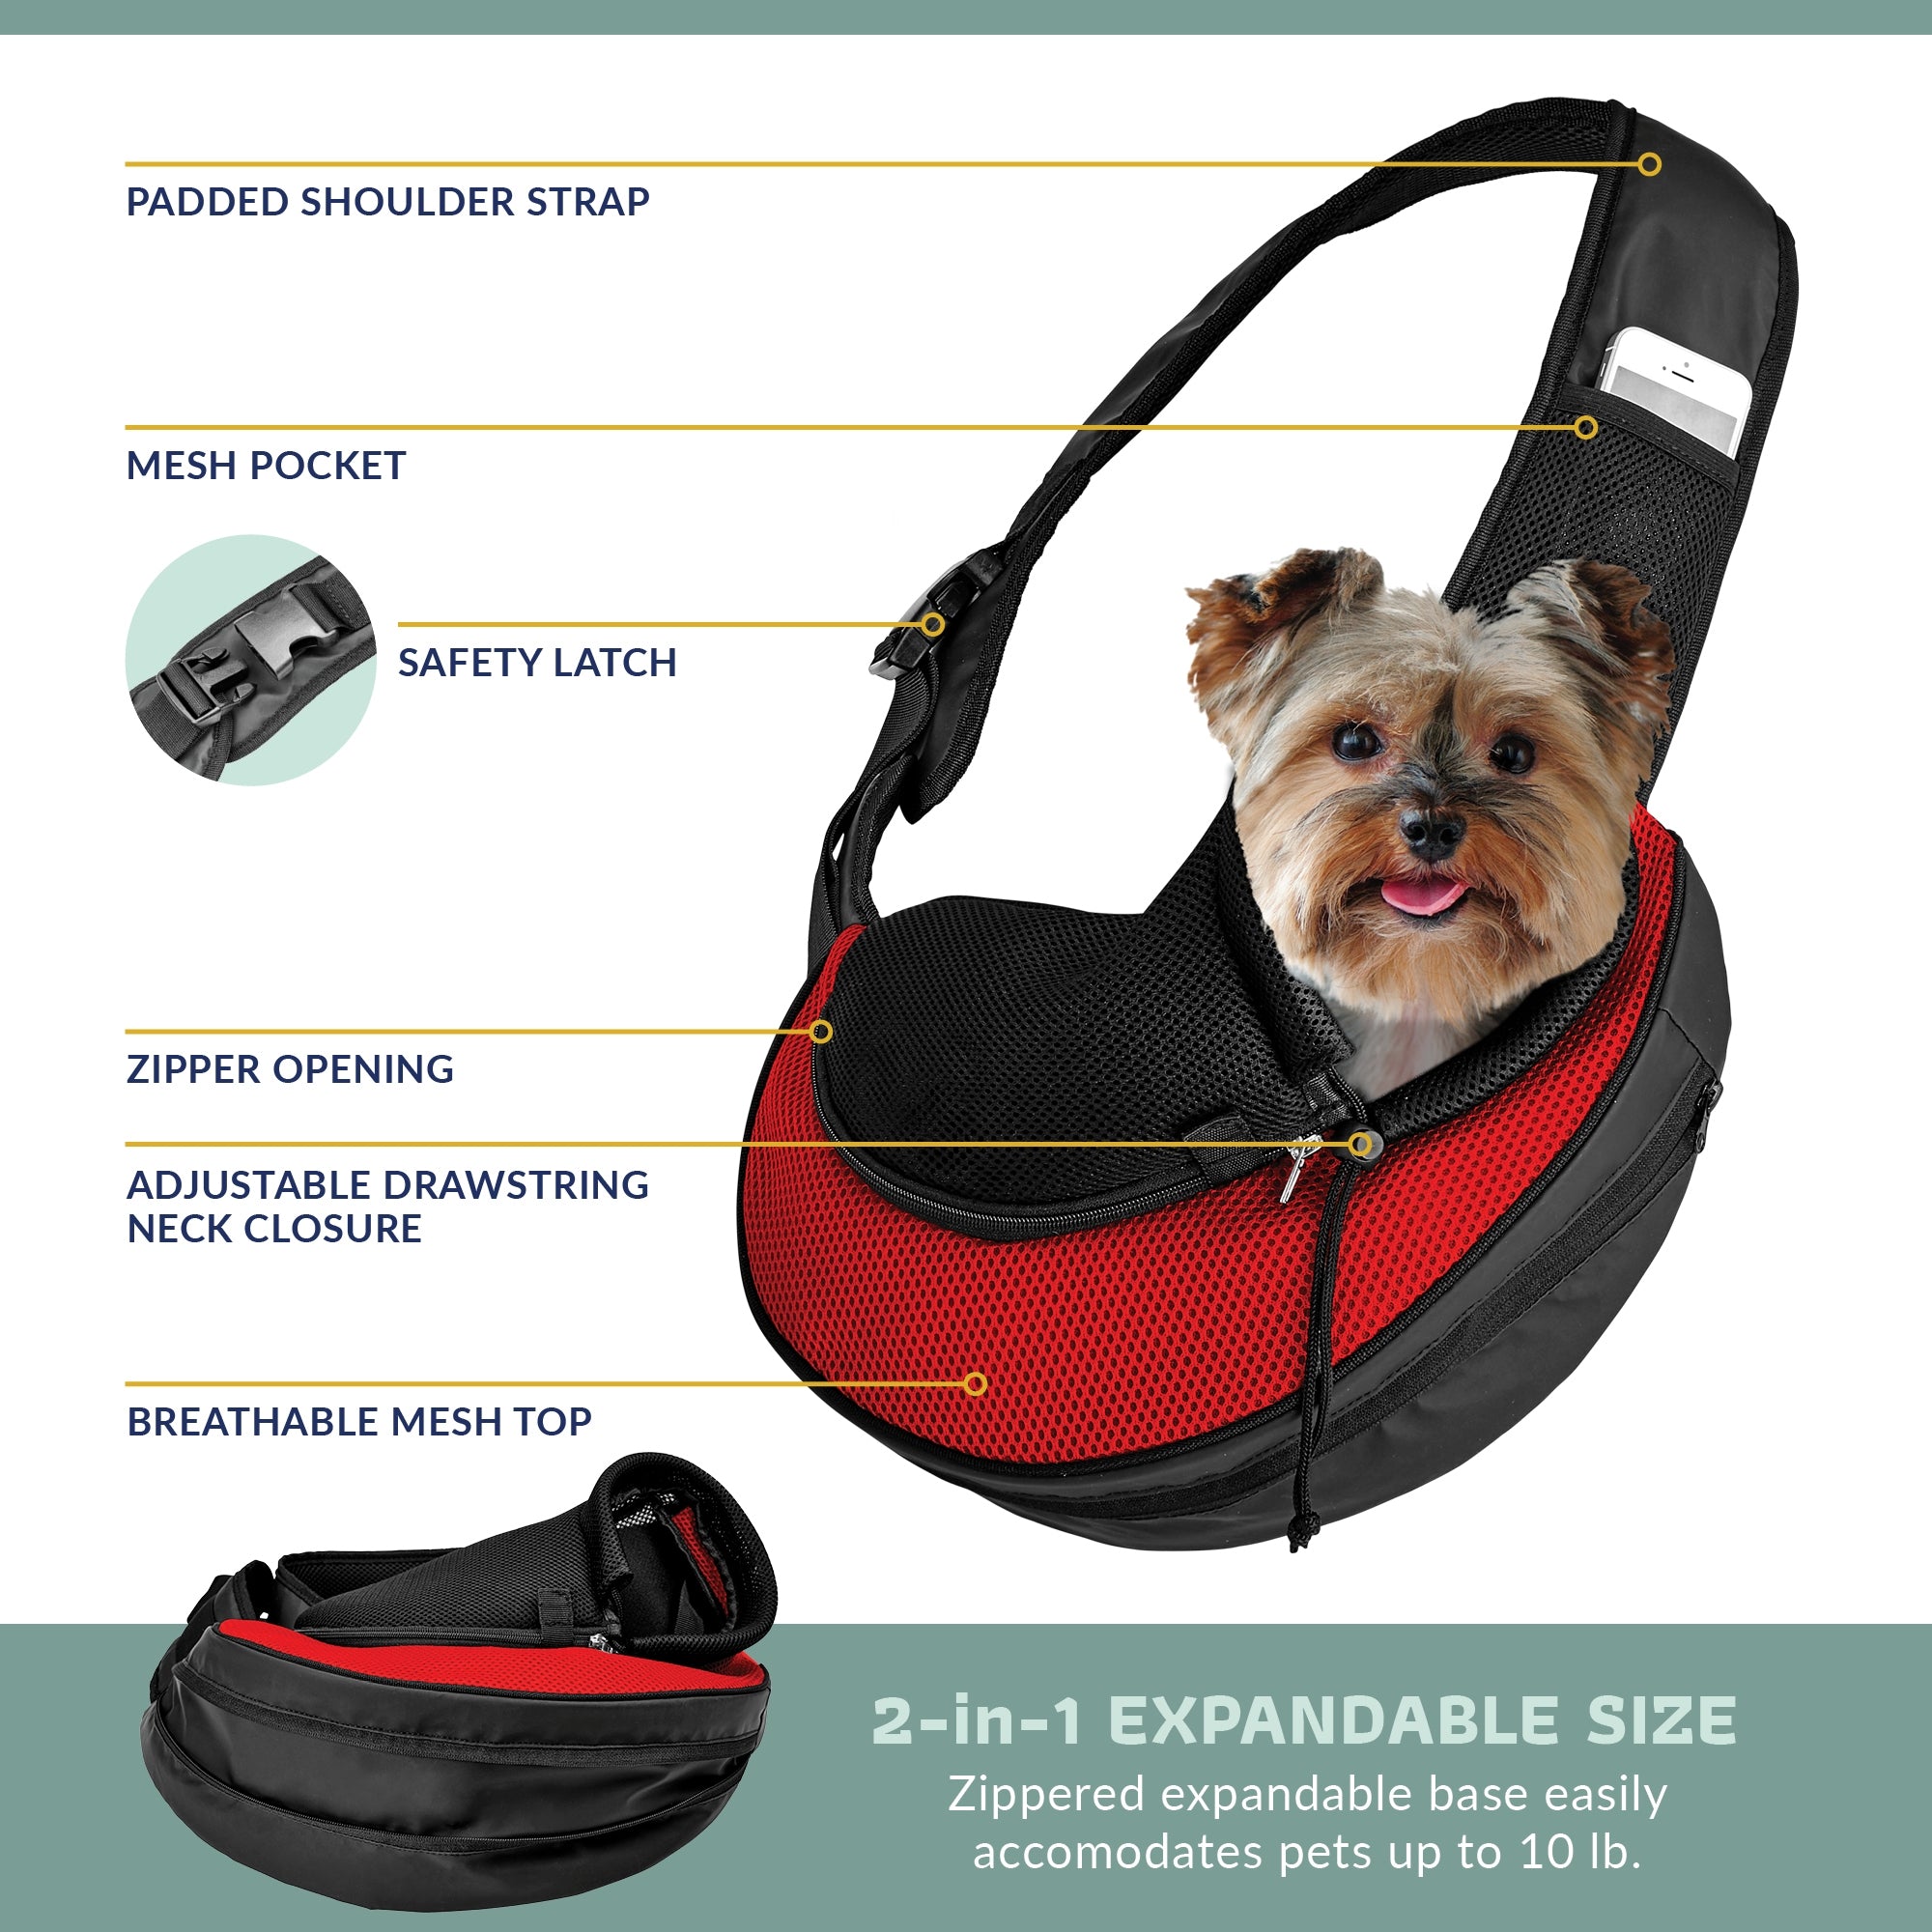 Katziela Expandable Sling Dog & Cat Carrier - Red